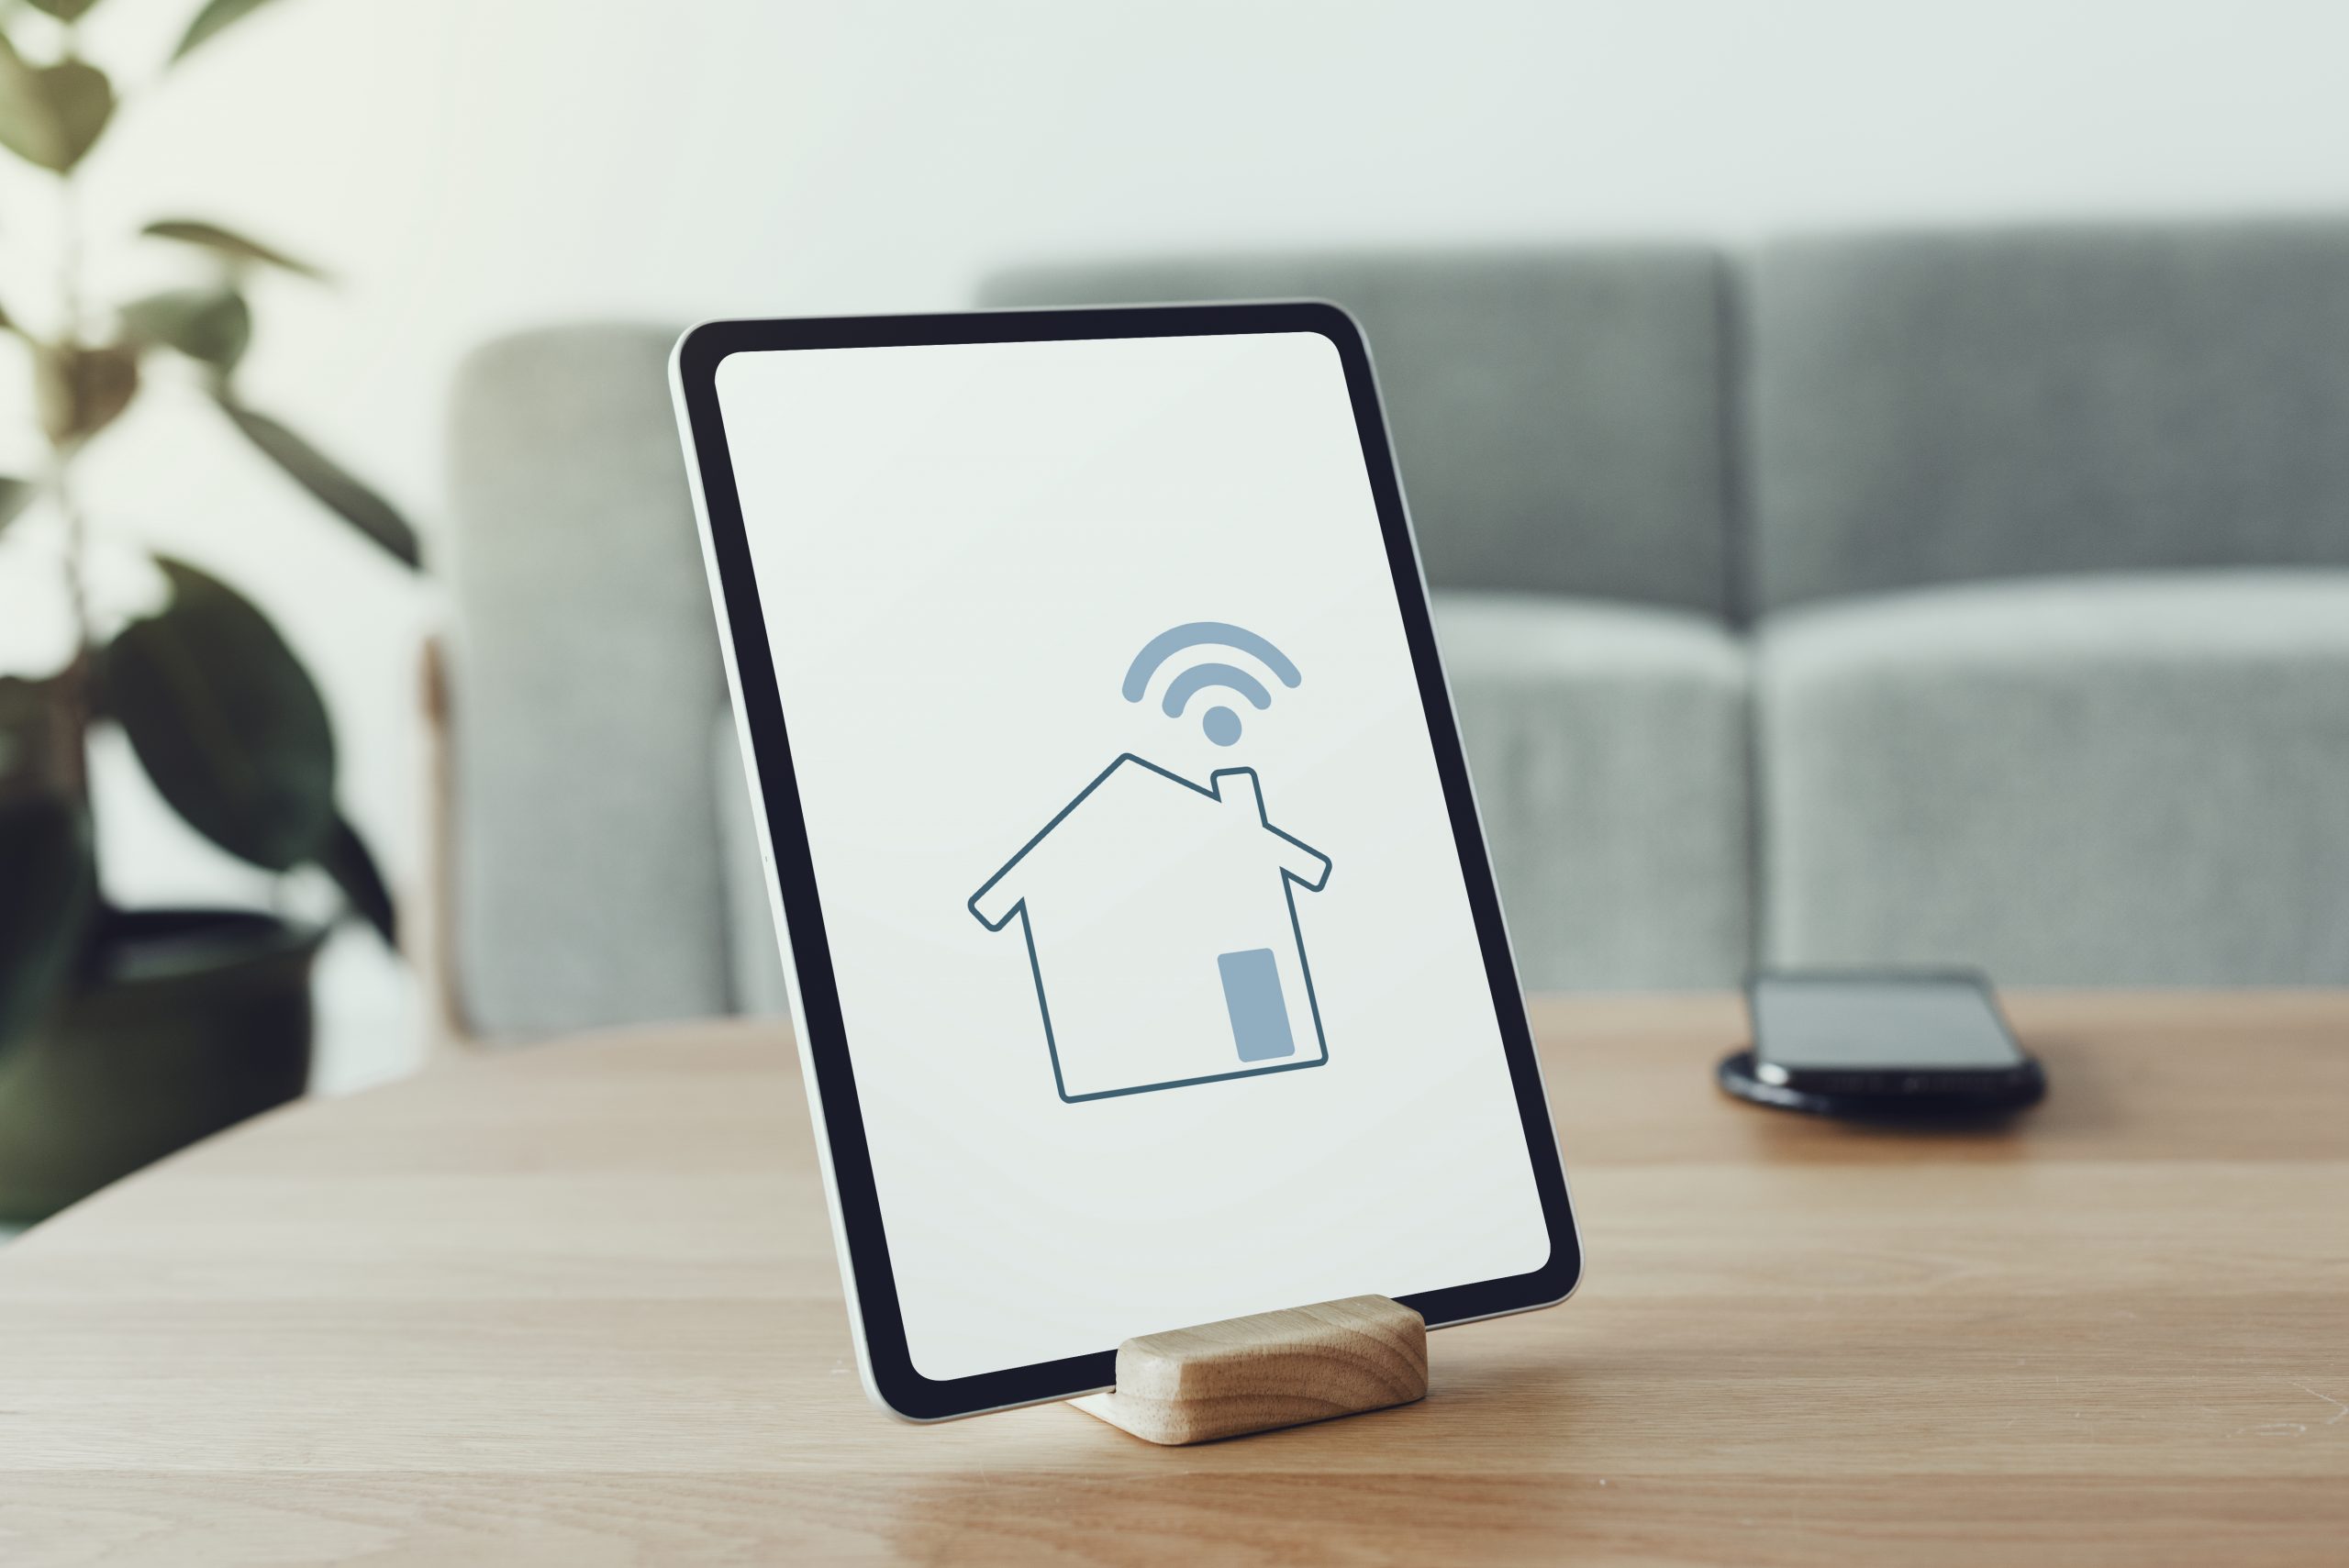 What You Need To Know About Creating A Smart Home